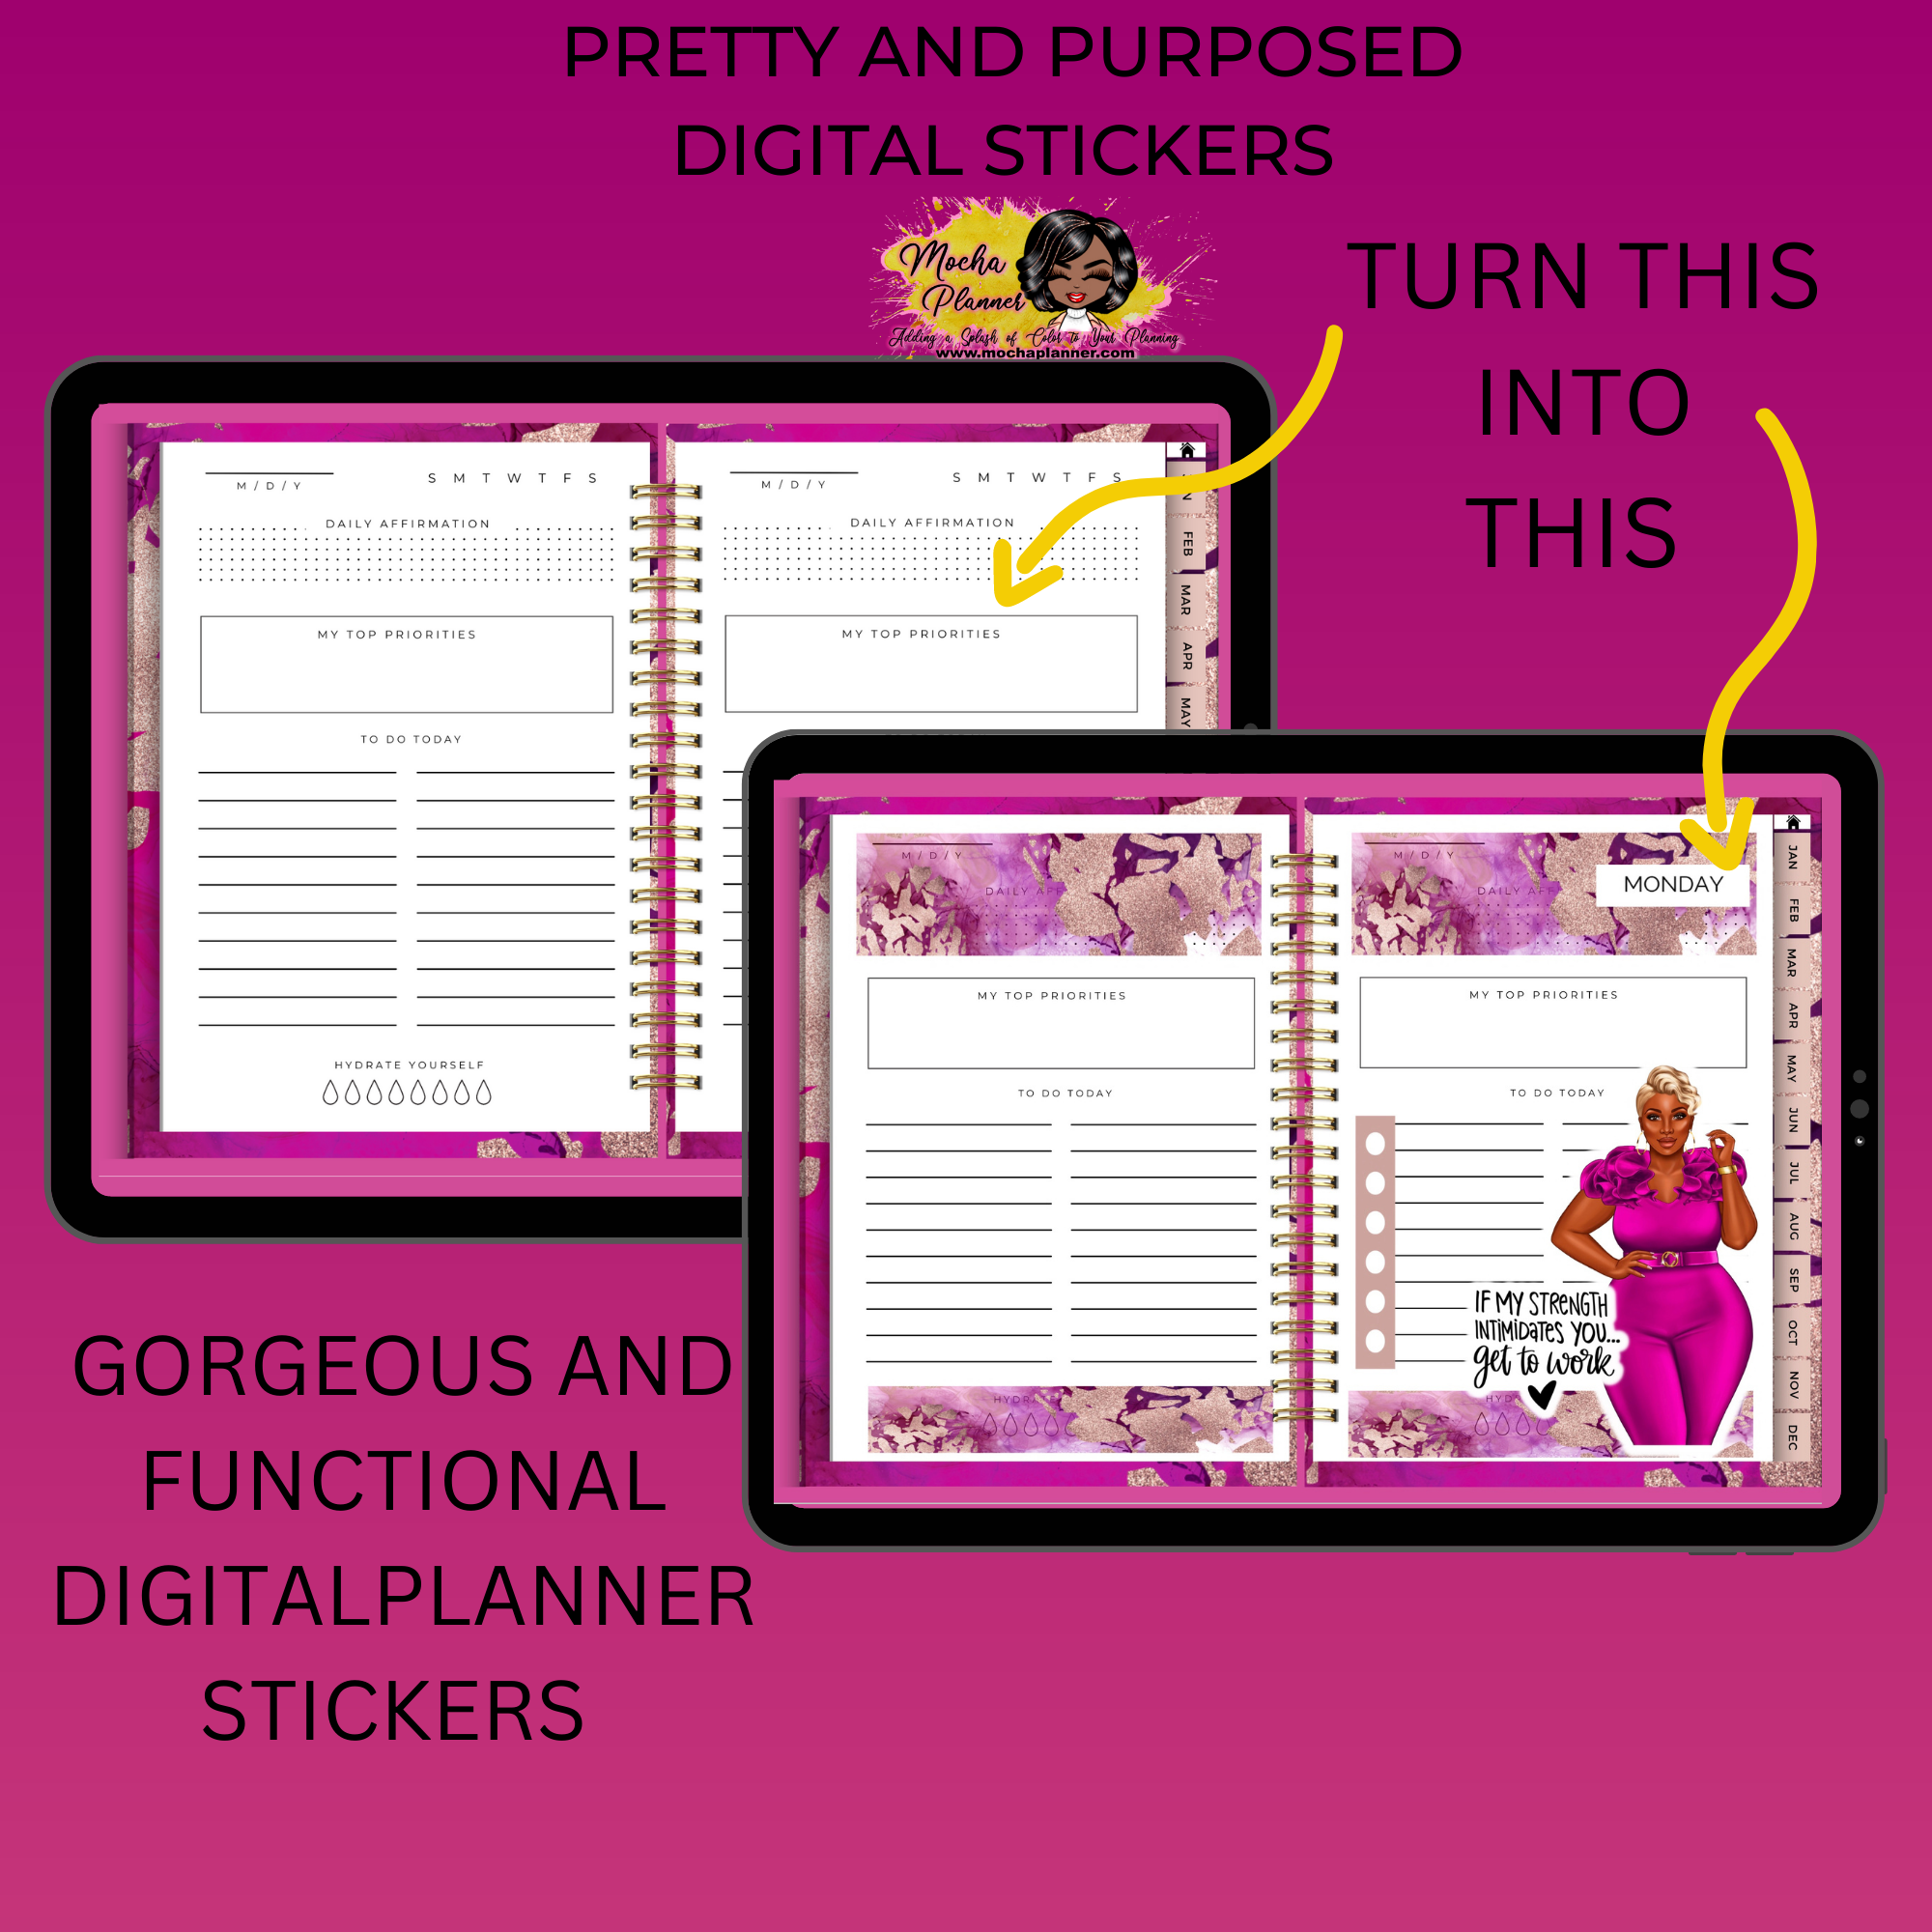 Printable Planner Text Stickers Quotes Stickers Stickers for